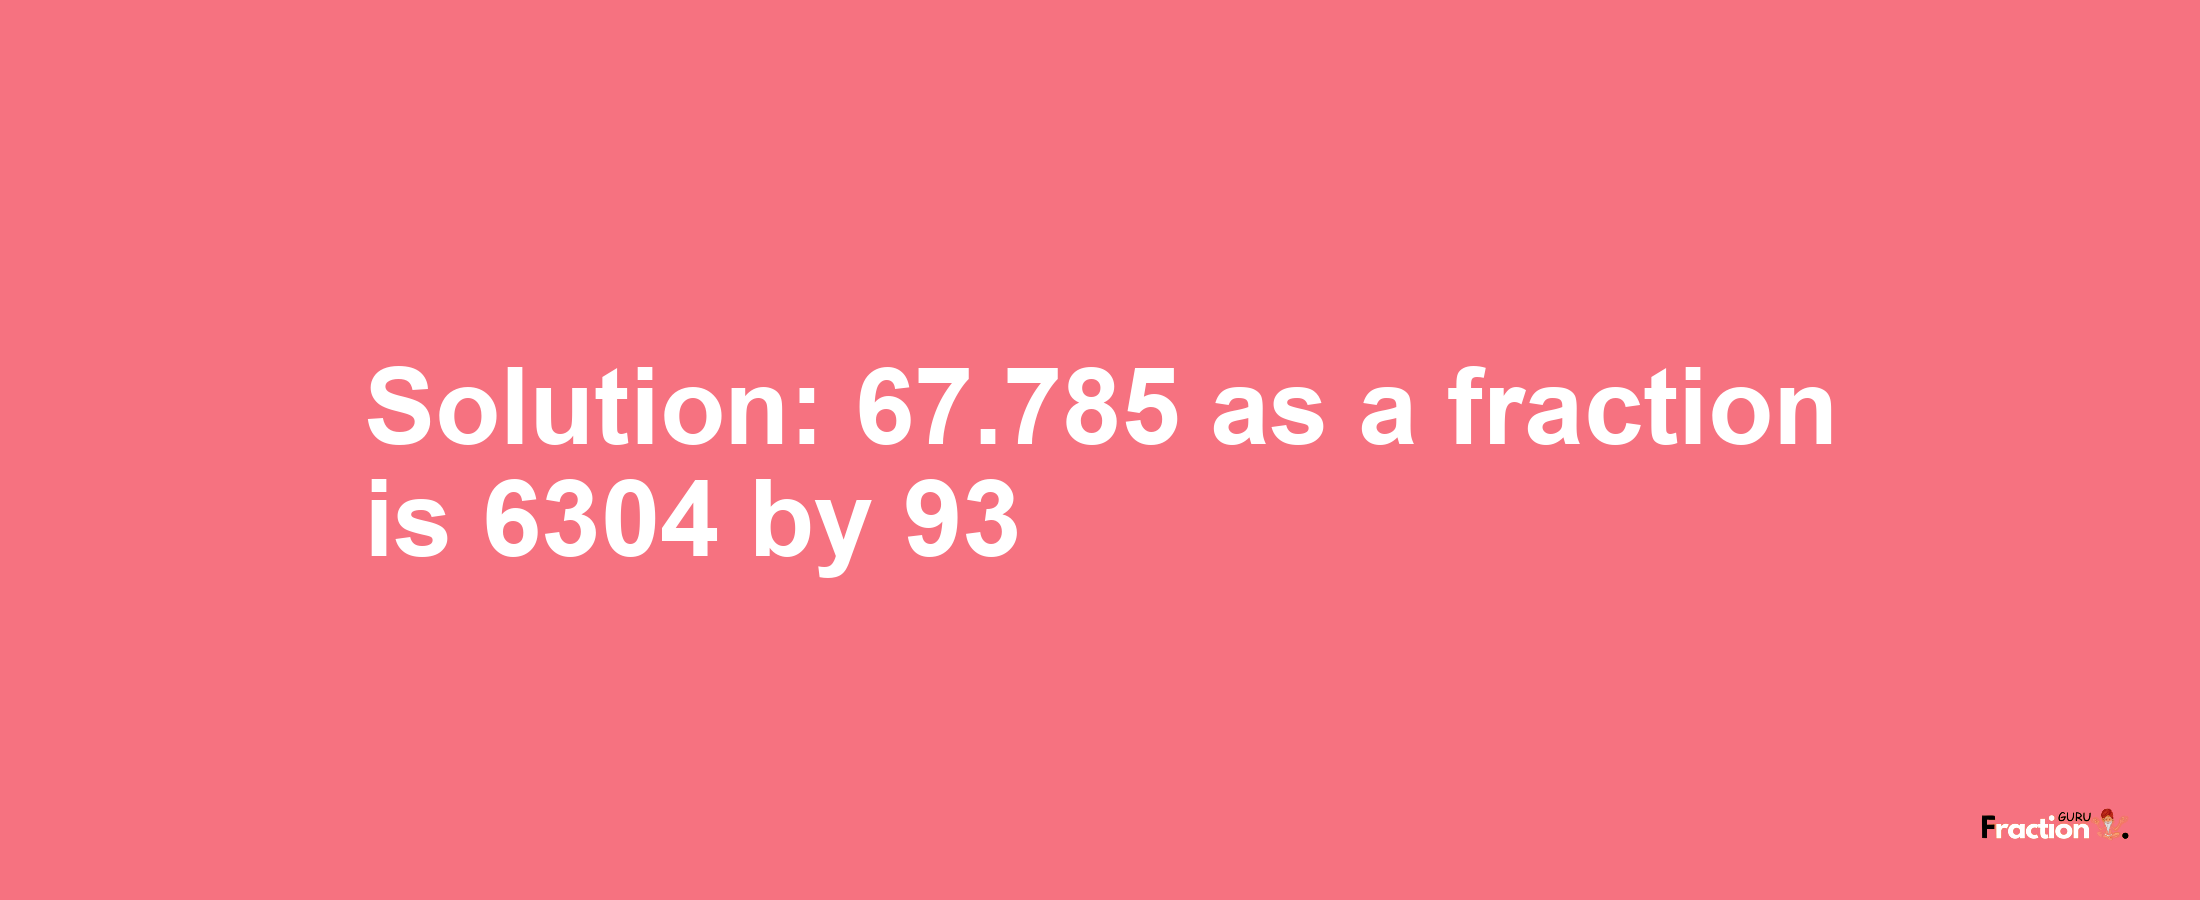 Solution:67.785 as a fraction is 6304/93